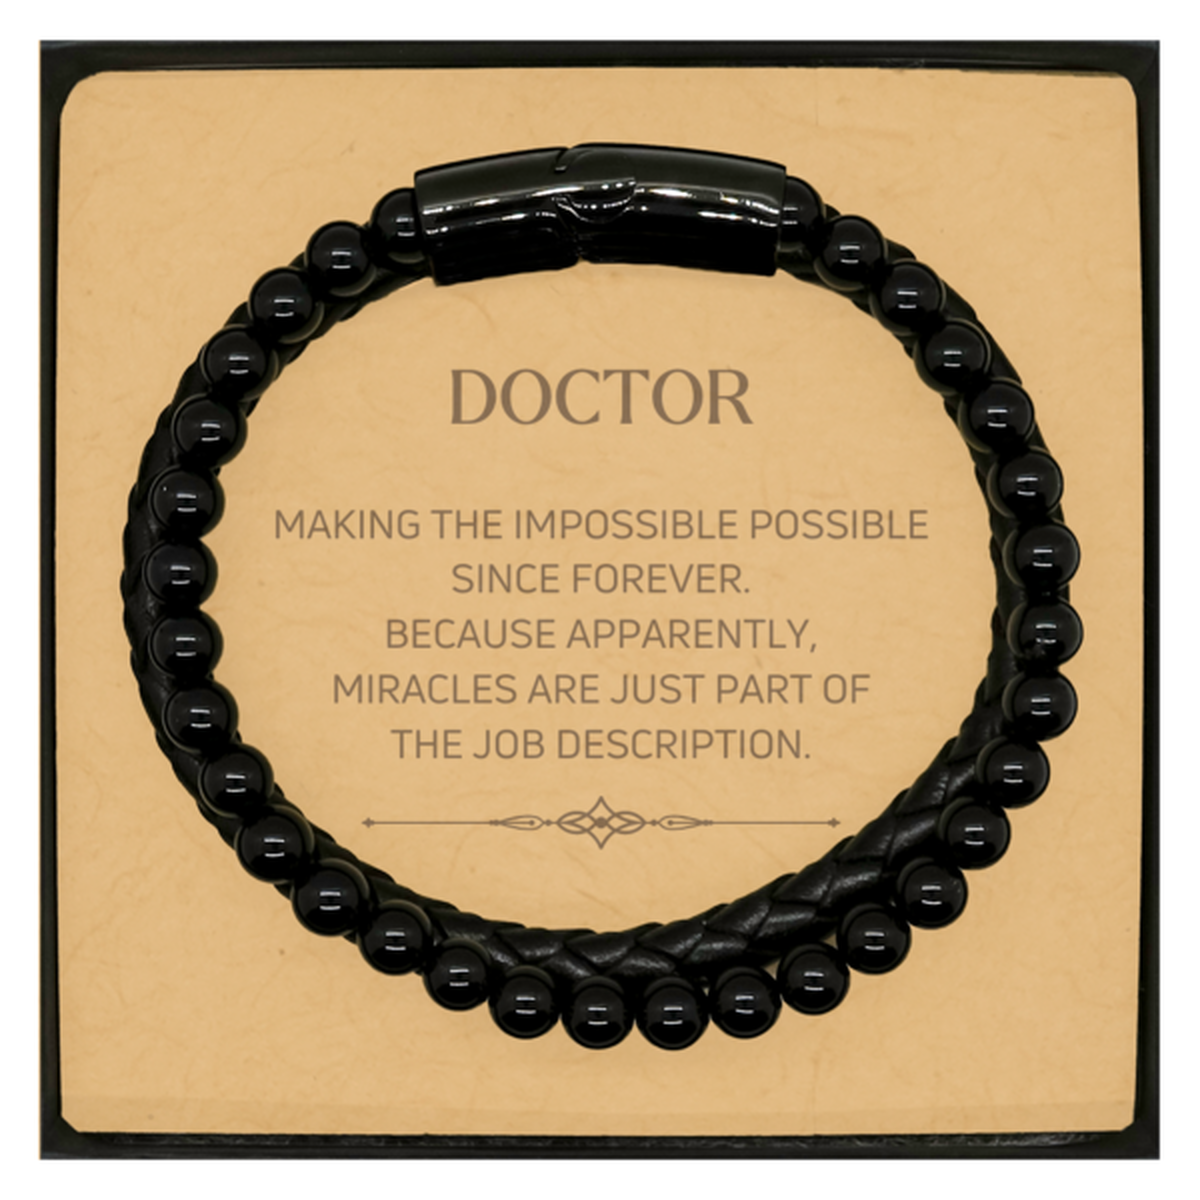 Funny Doctor Gifts, Miracles are just part of the job description, Inspirational Birthday Christmas Stone Leather Bracelets For Doctor, Men, Women, Coworkers, Friends, Boss